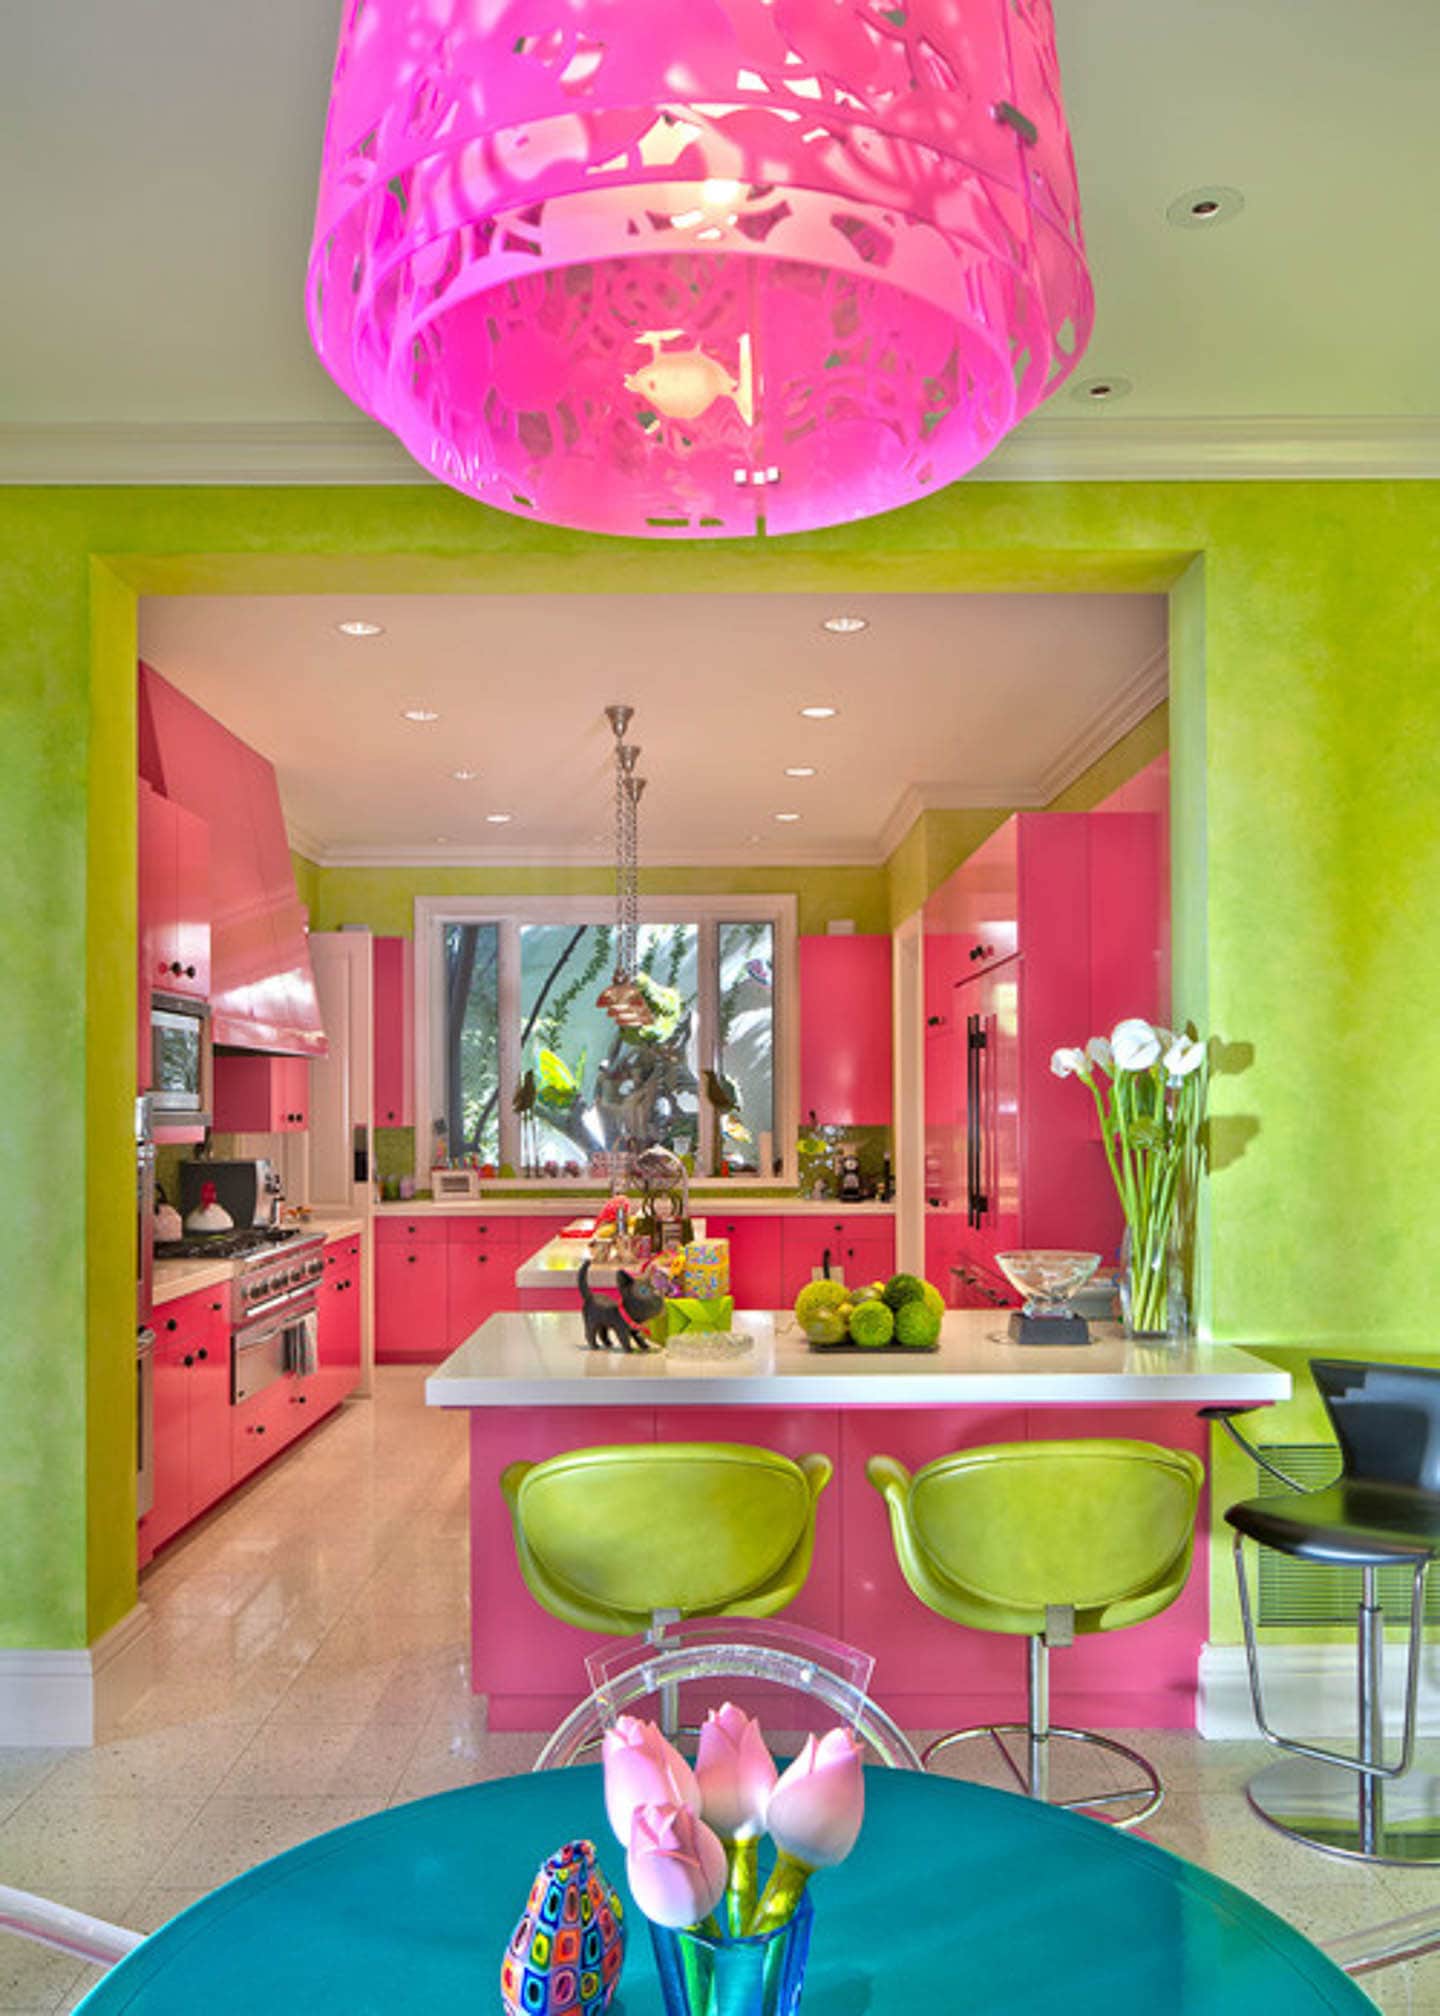 Colorful kitchen with pink kitchen cabinets, white countertops and lime green walls and bar stools